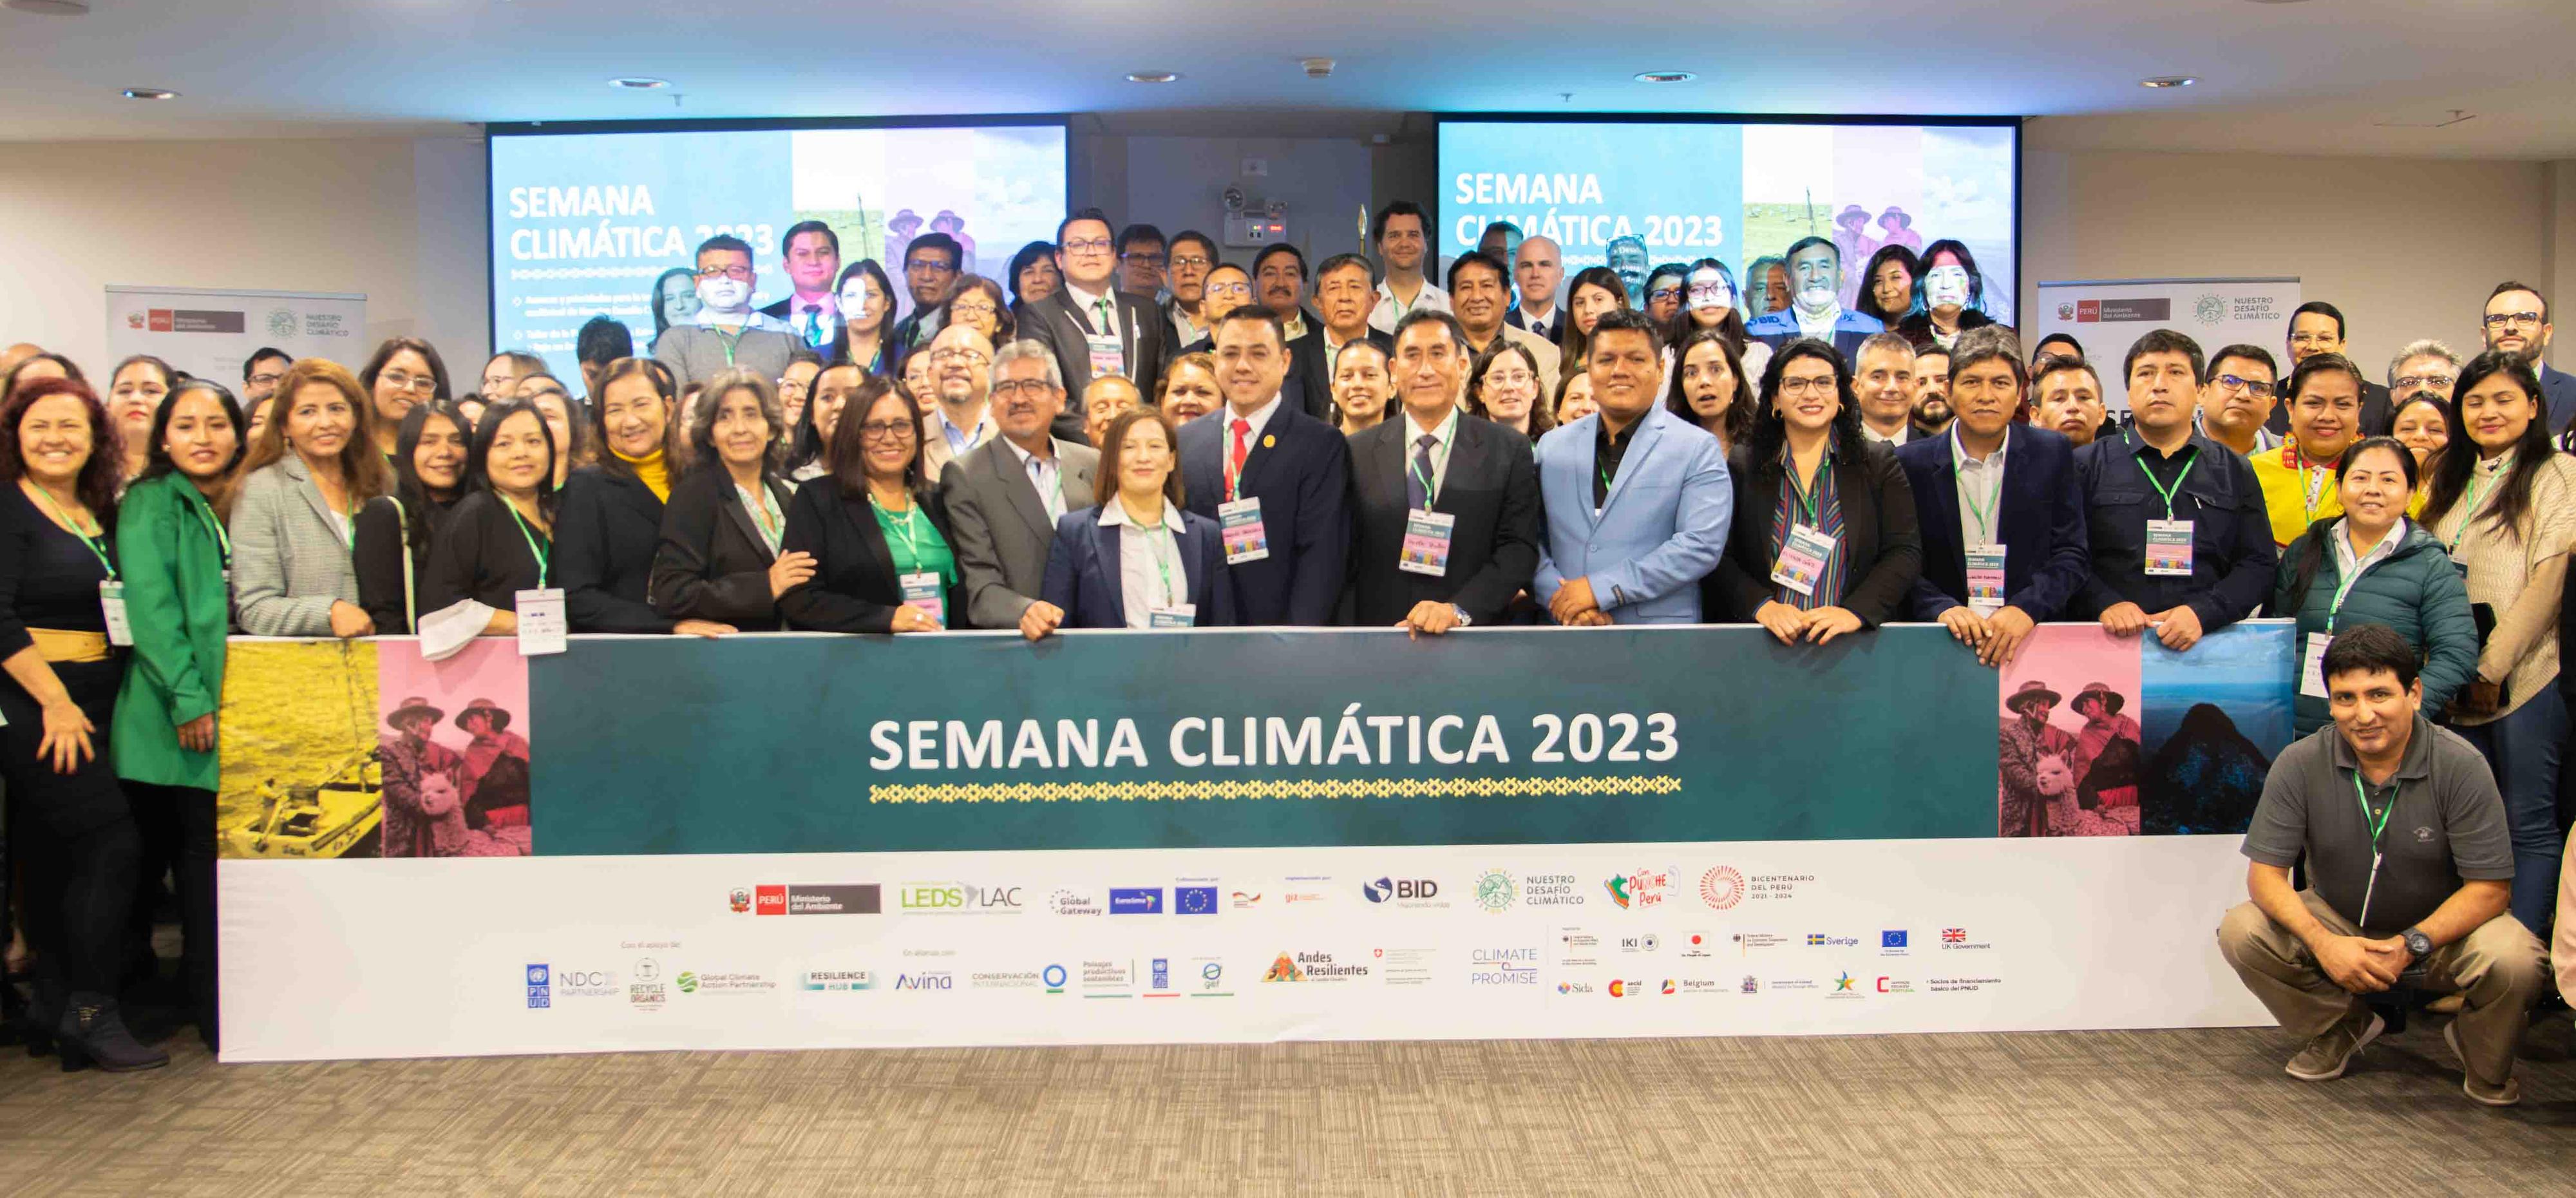 Meeting with regional governments (GORES) as part of Peru's Climate Week from 20 to 23 August 2023, focusing on strengthening the role of GORES in the implementation of the NDCs.